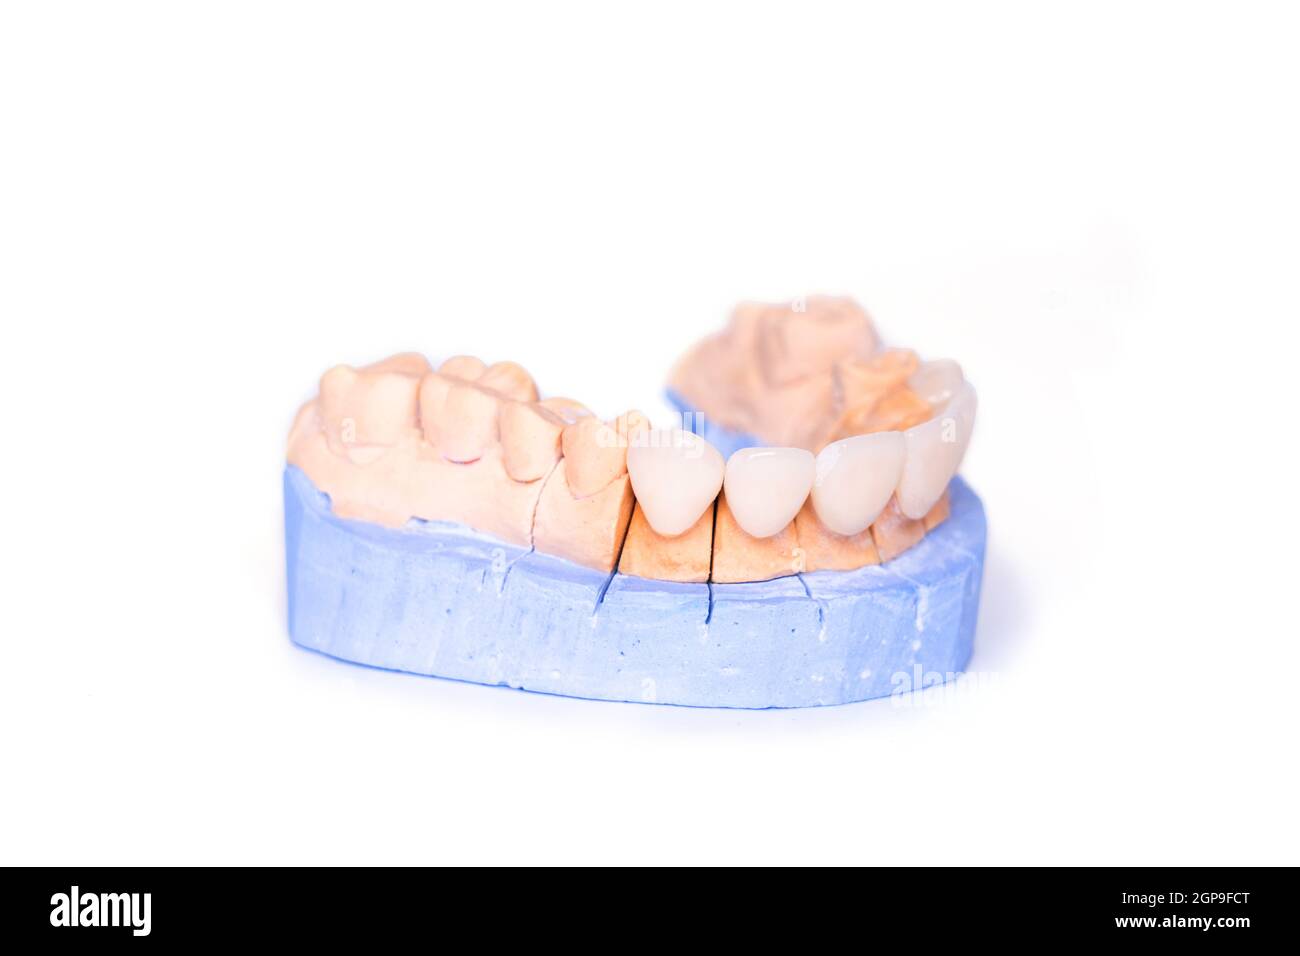 Veneers and crowns isolated on white background. Plaster model of teeth. lower jaw plaster model with prepared teeth. White front teeth veneers on Stock Photo